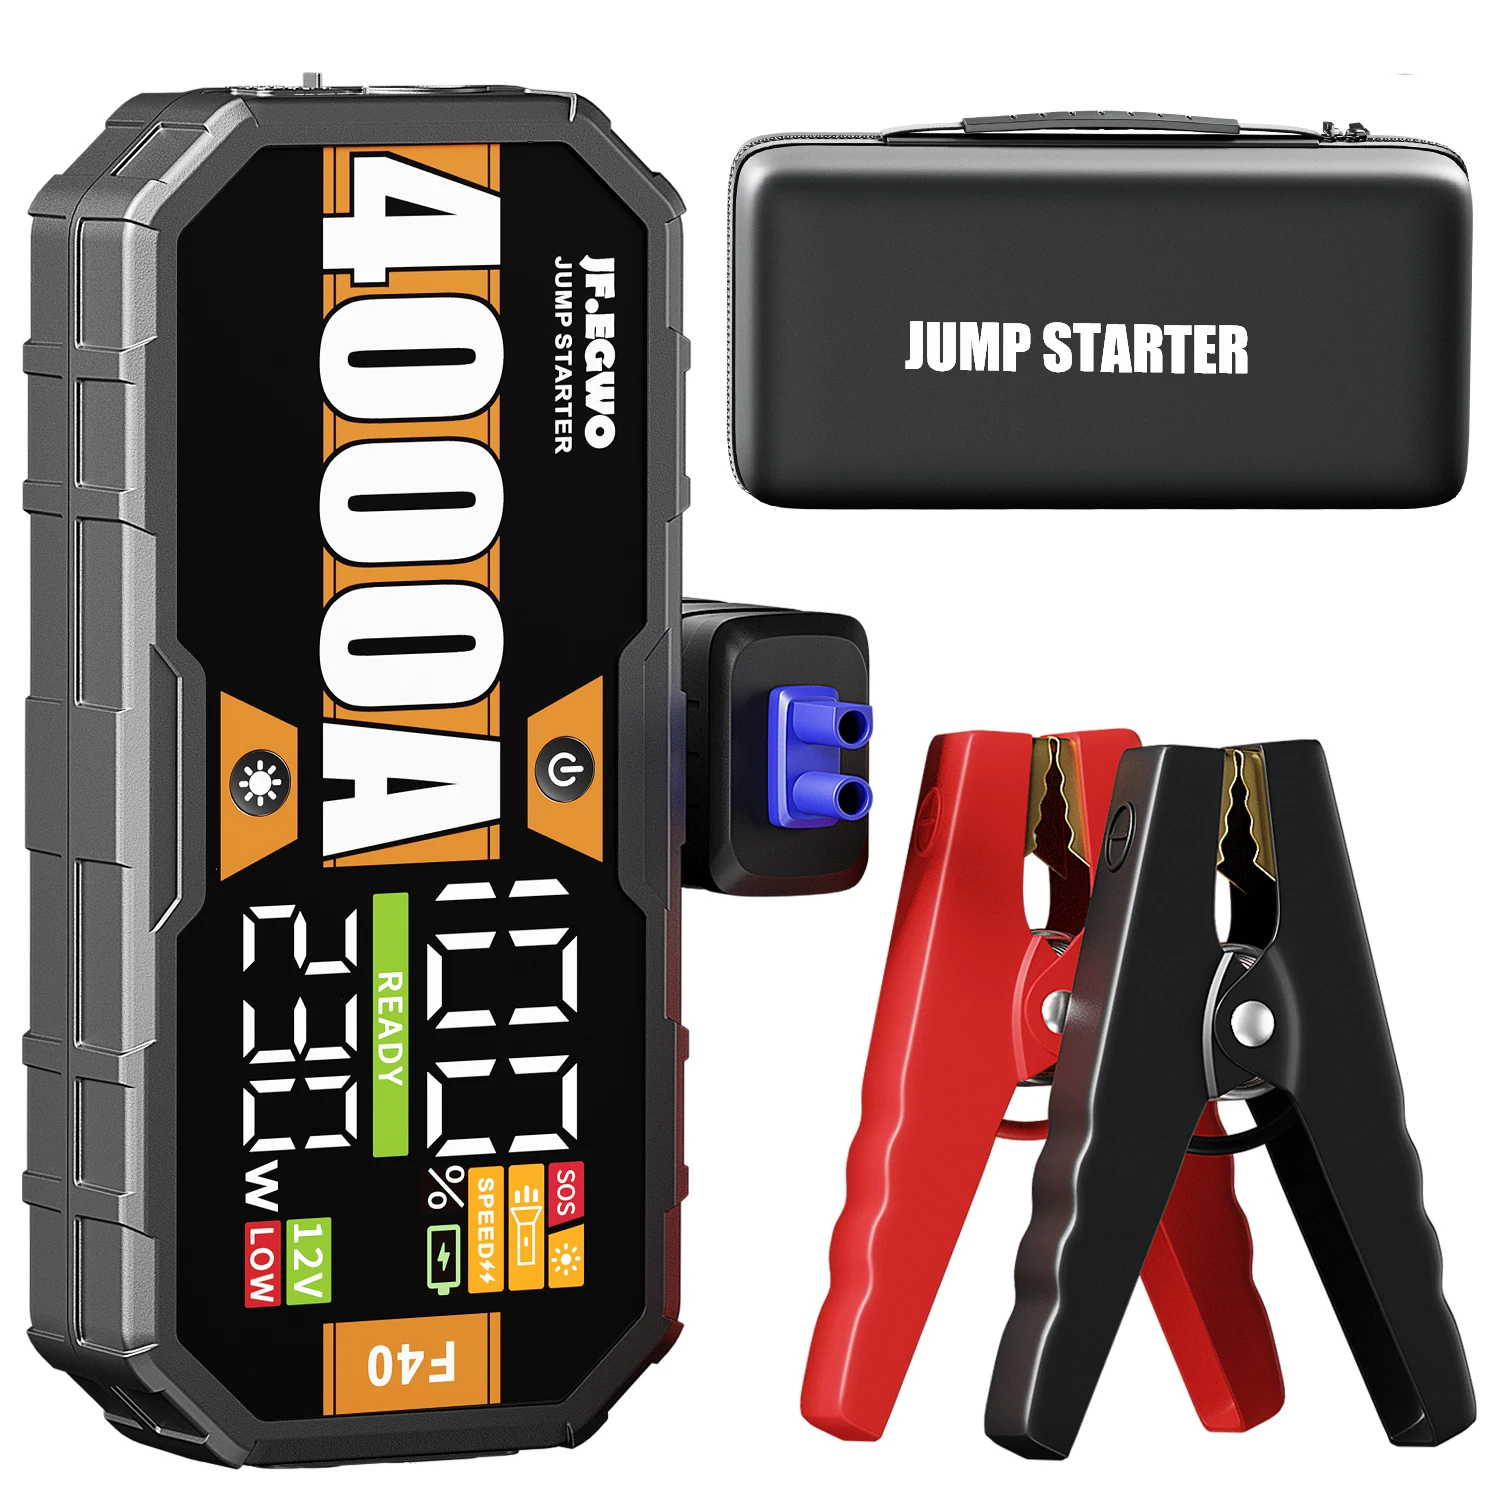 

Car jump box for car battery portable booster charger 12V starting device auto emergency 24000 jump starter